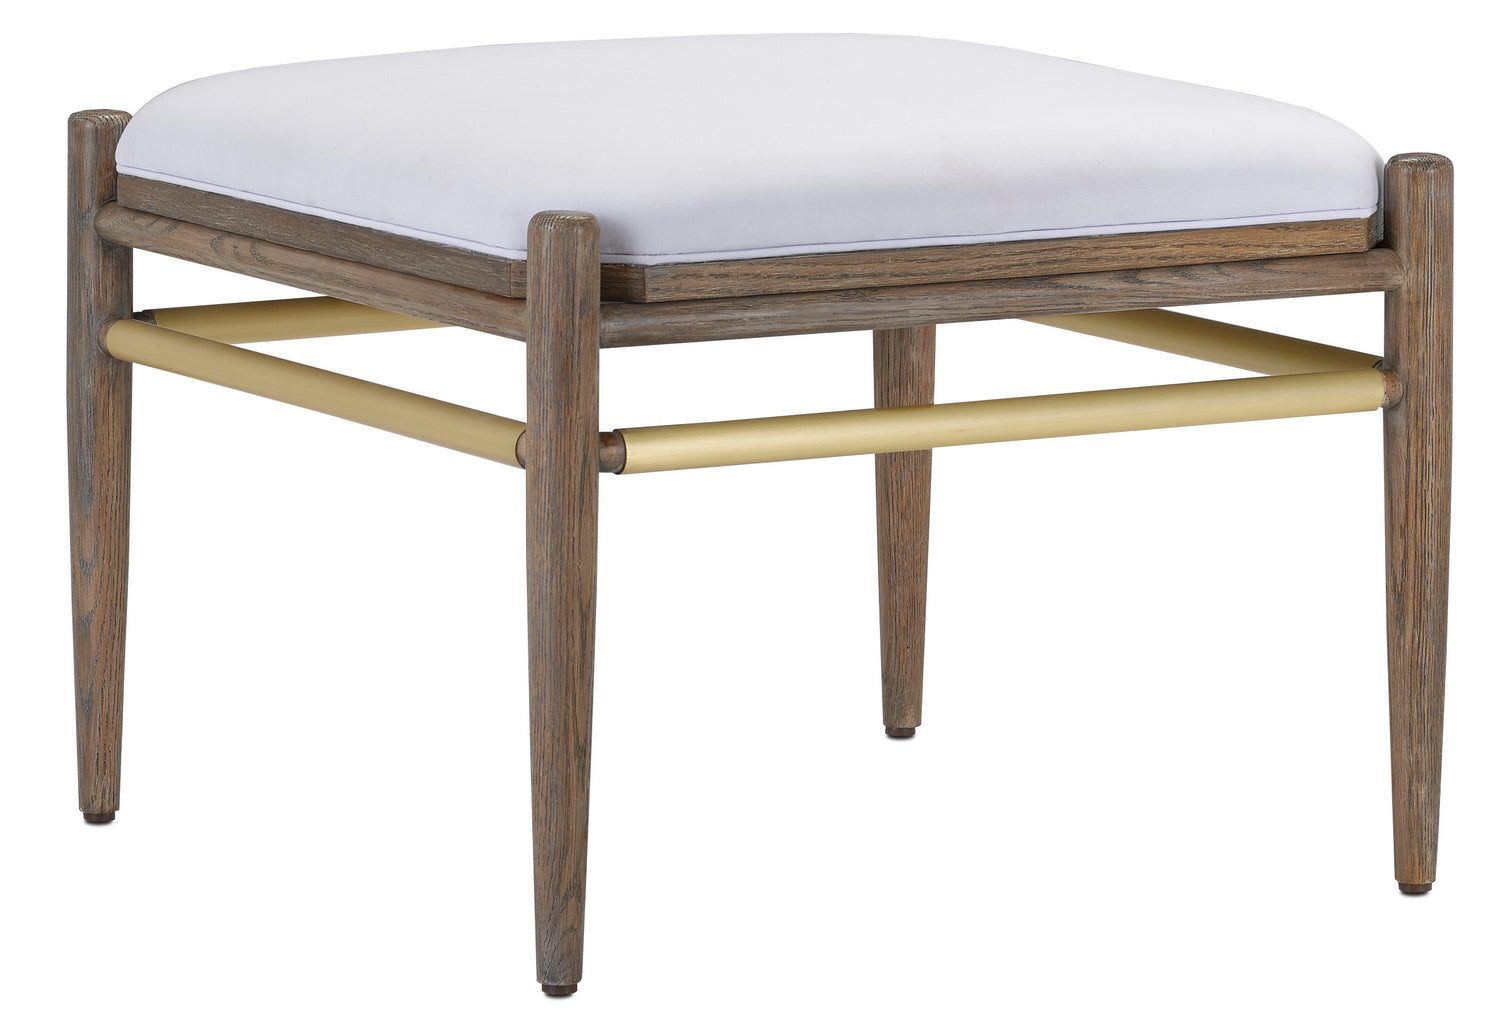 Ottoman from the Visby collection in Light Pepper/Brushed Brass finish